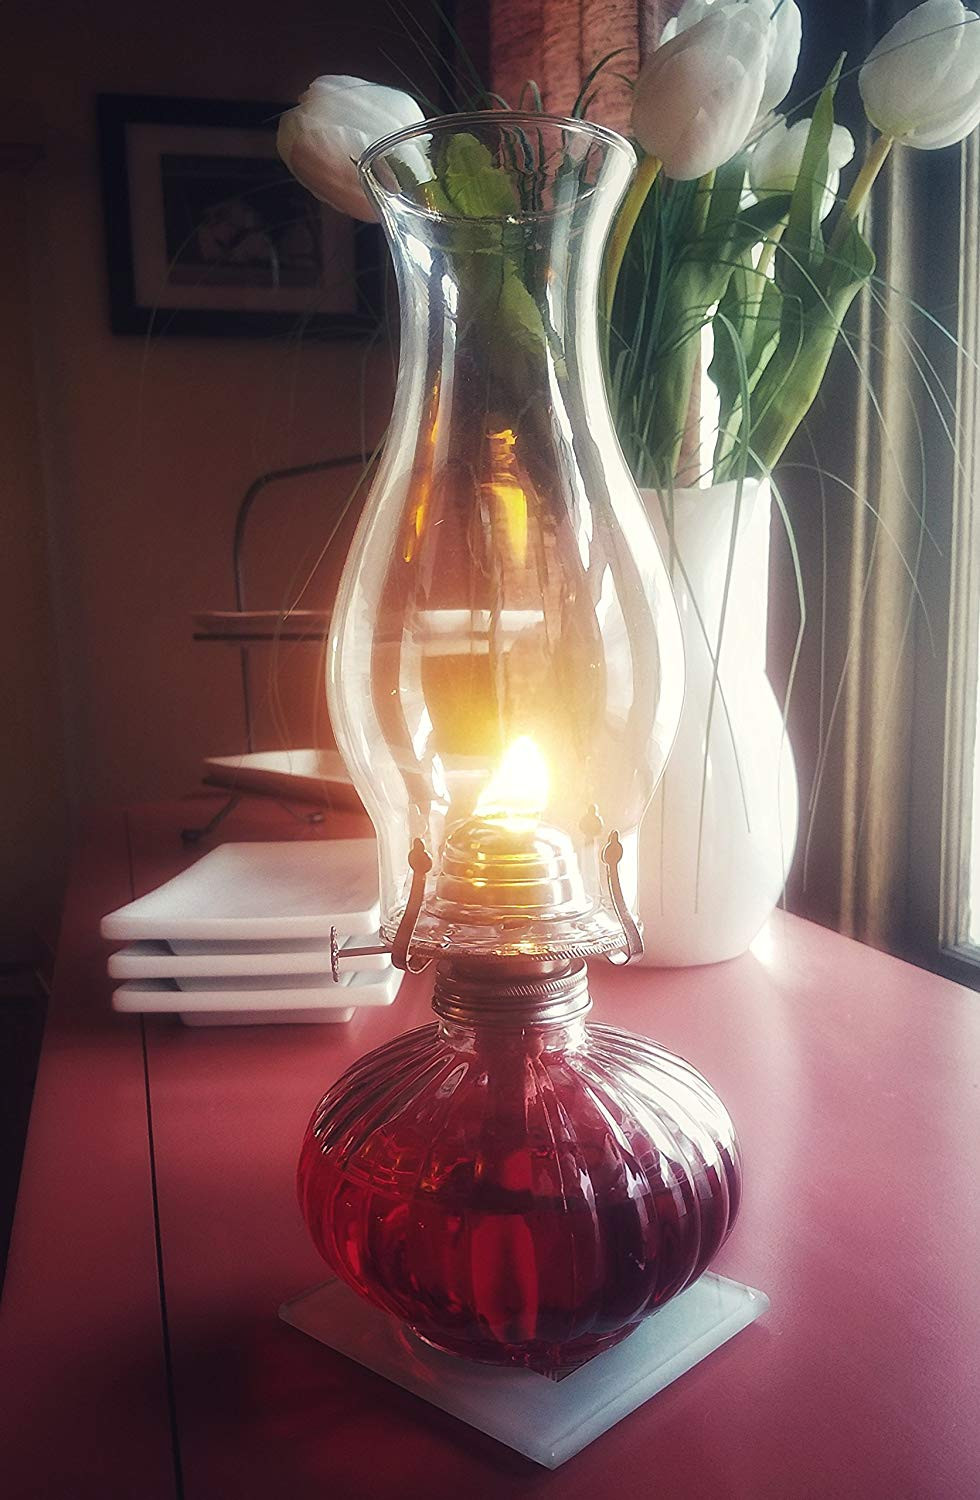 ac moore glass vases of amazon com lamplight 60012 ultra pure lamp oil 32 ounce red home with regard to amazon com lamplight 60012 ultra pure lamp oil 32 ounce red home kitchen